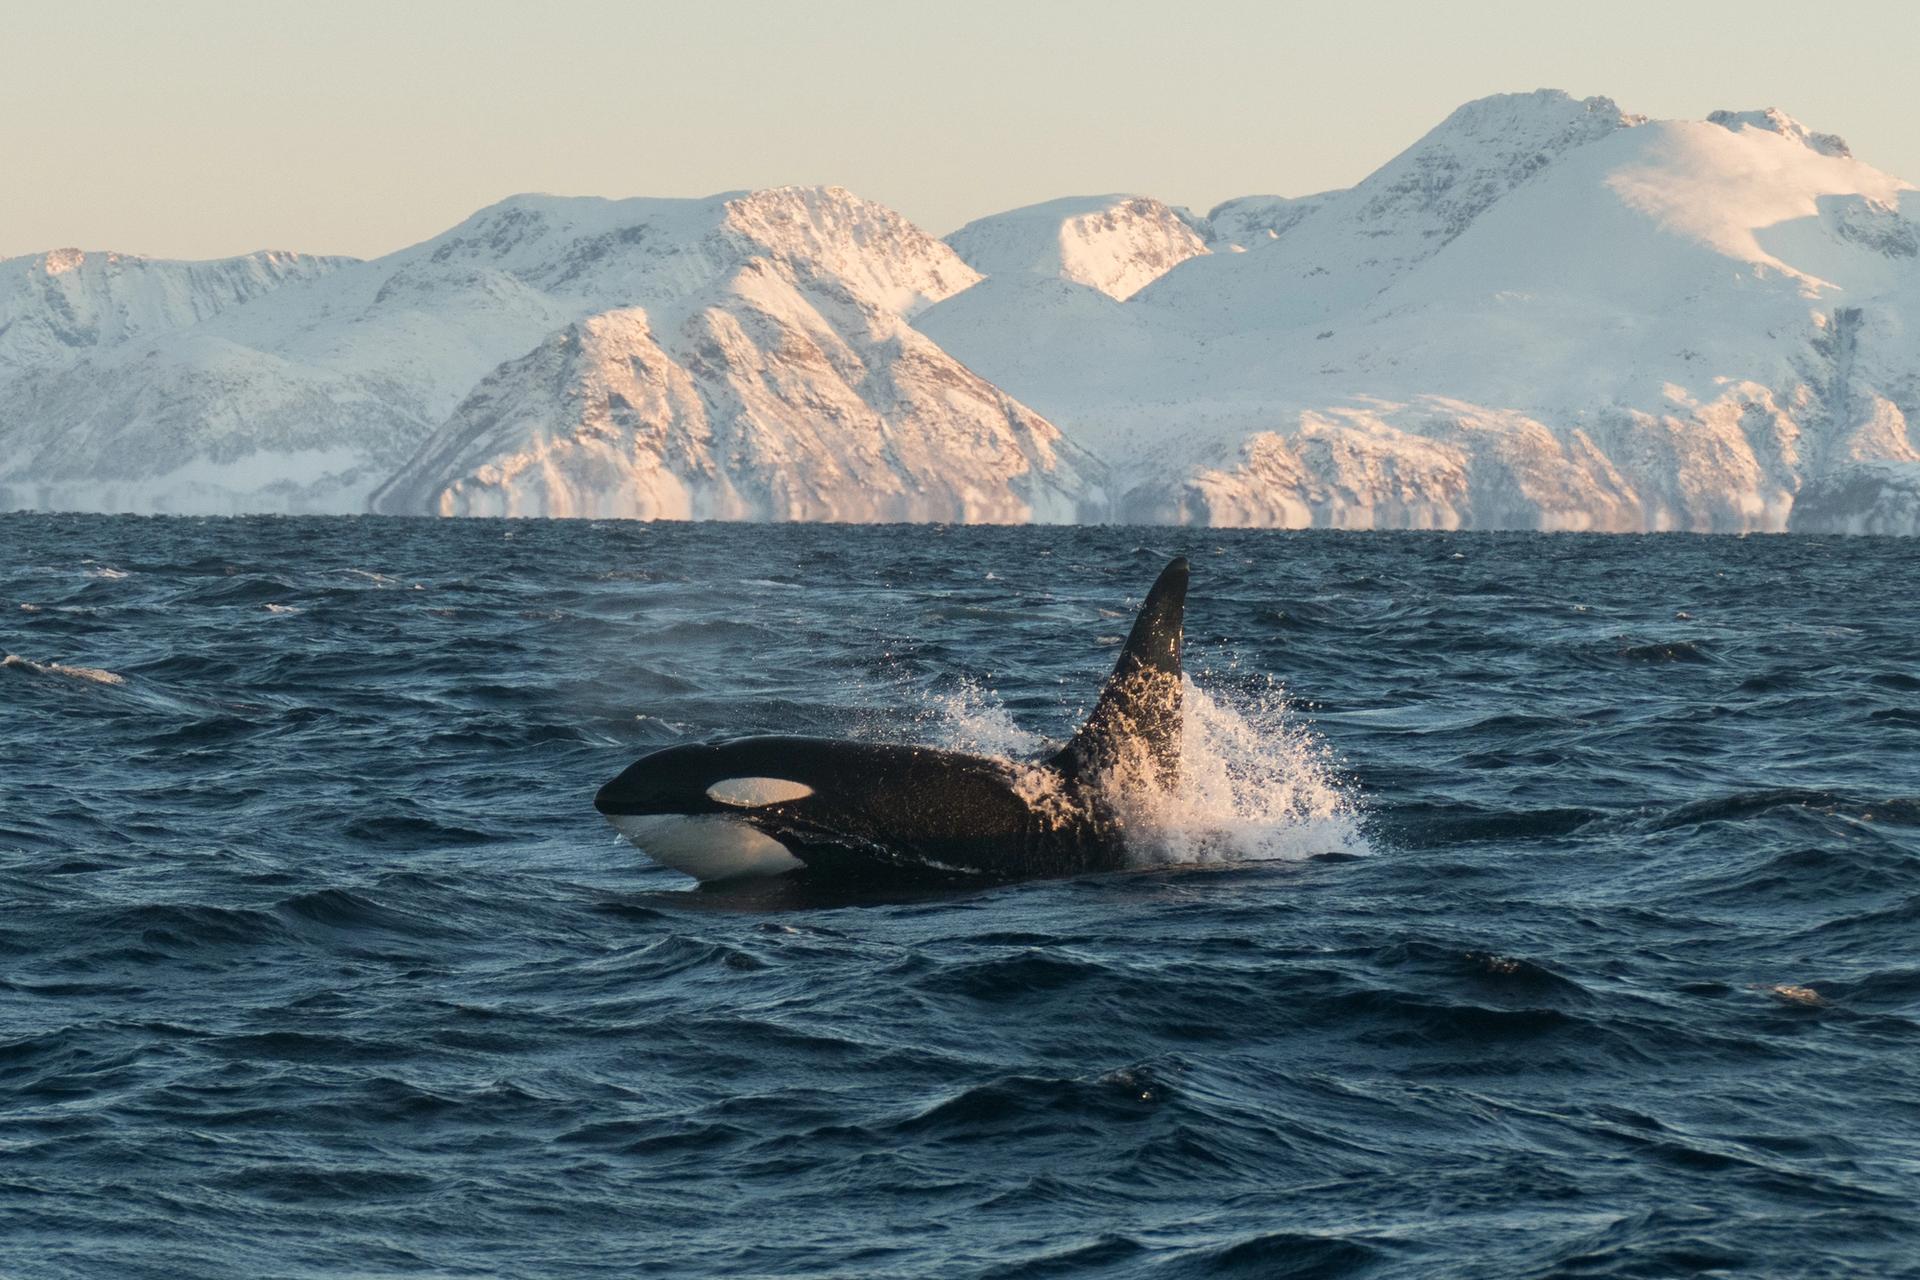 An orca i sswimming in the ocean with montains in backgournd